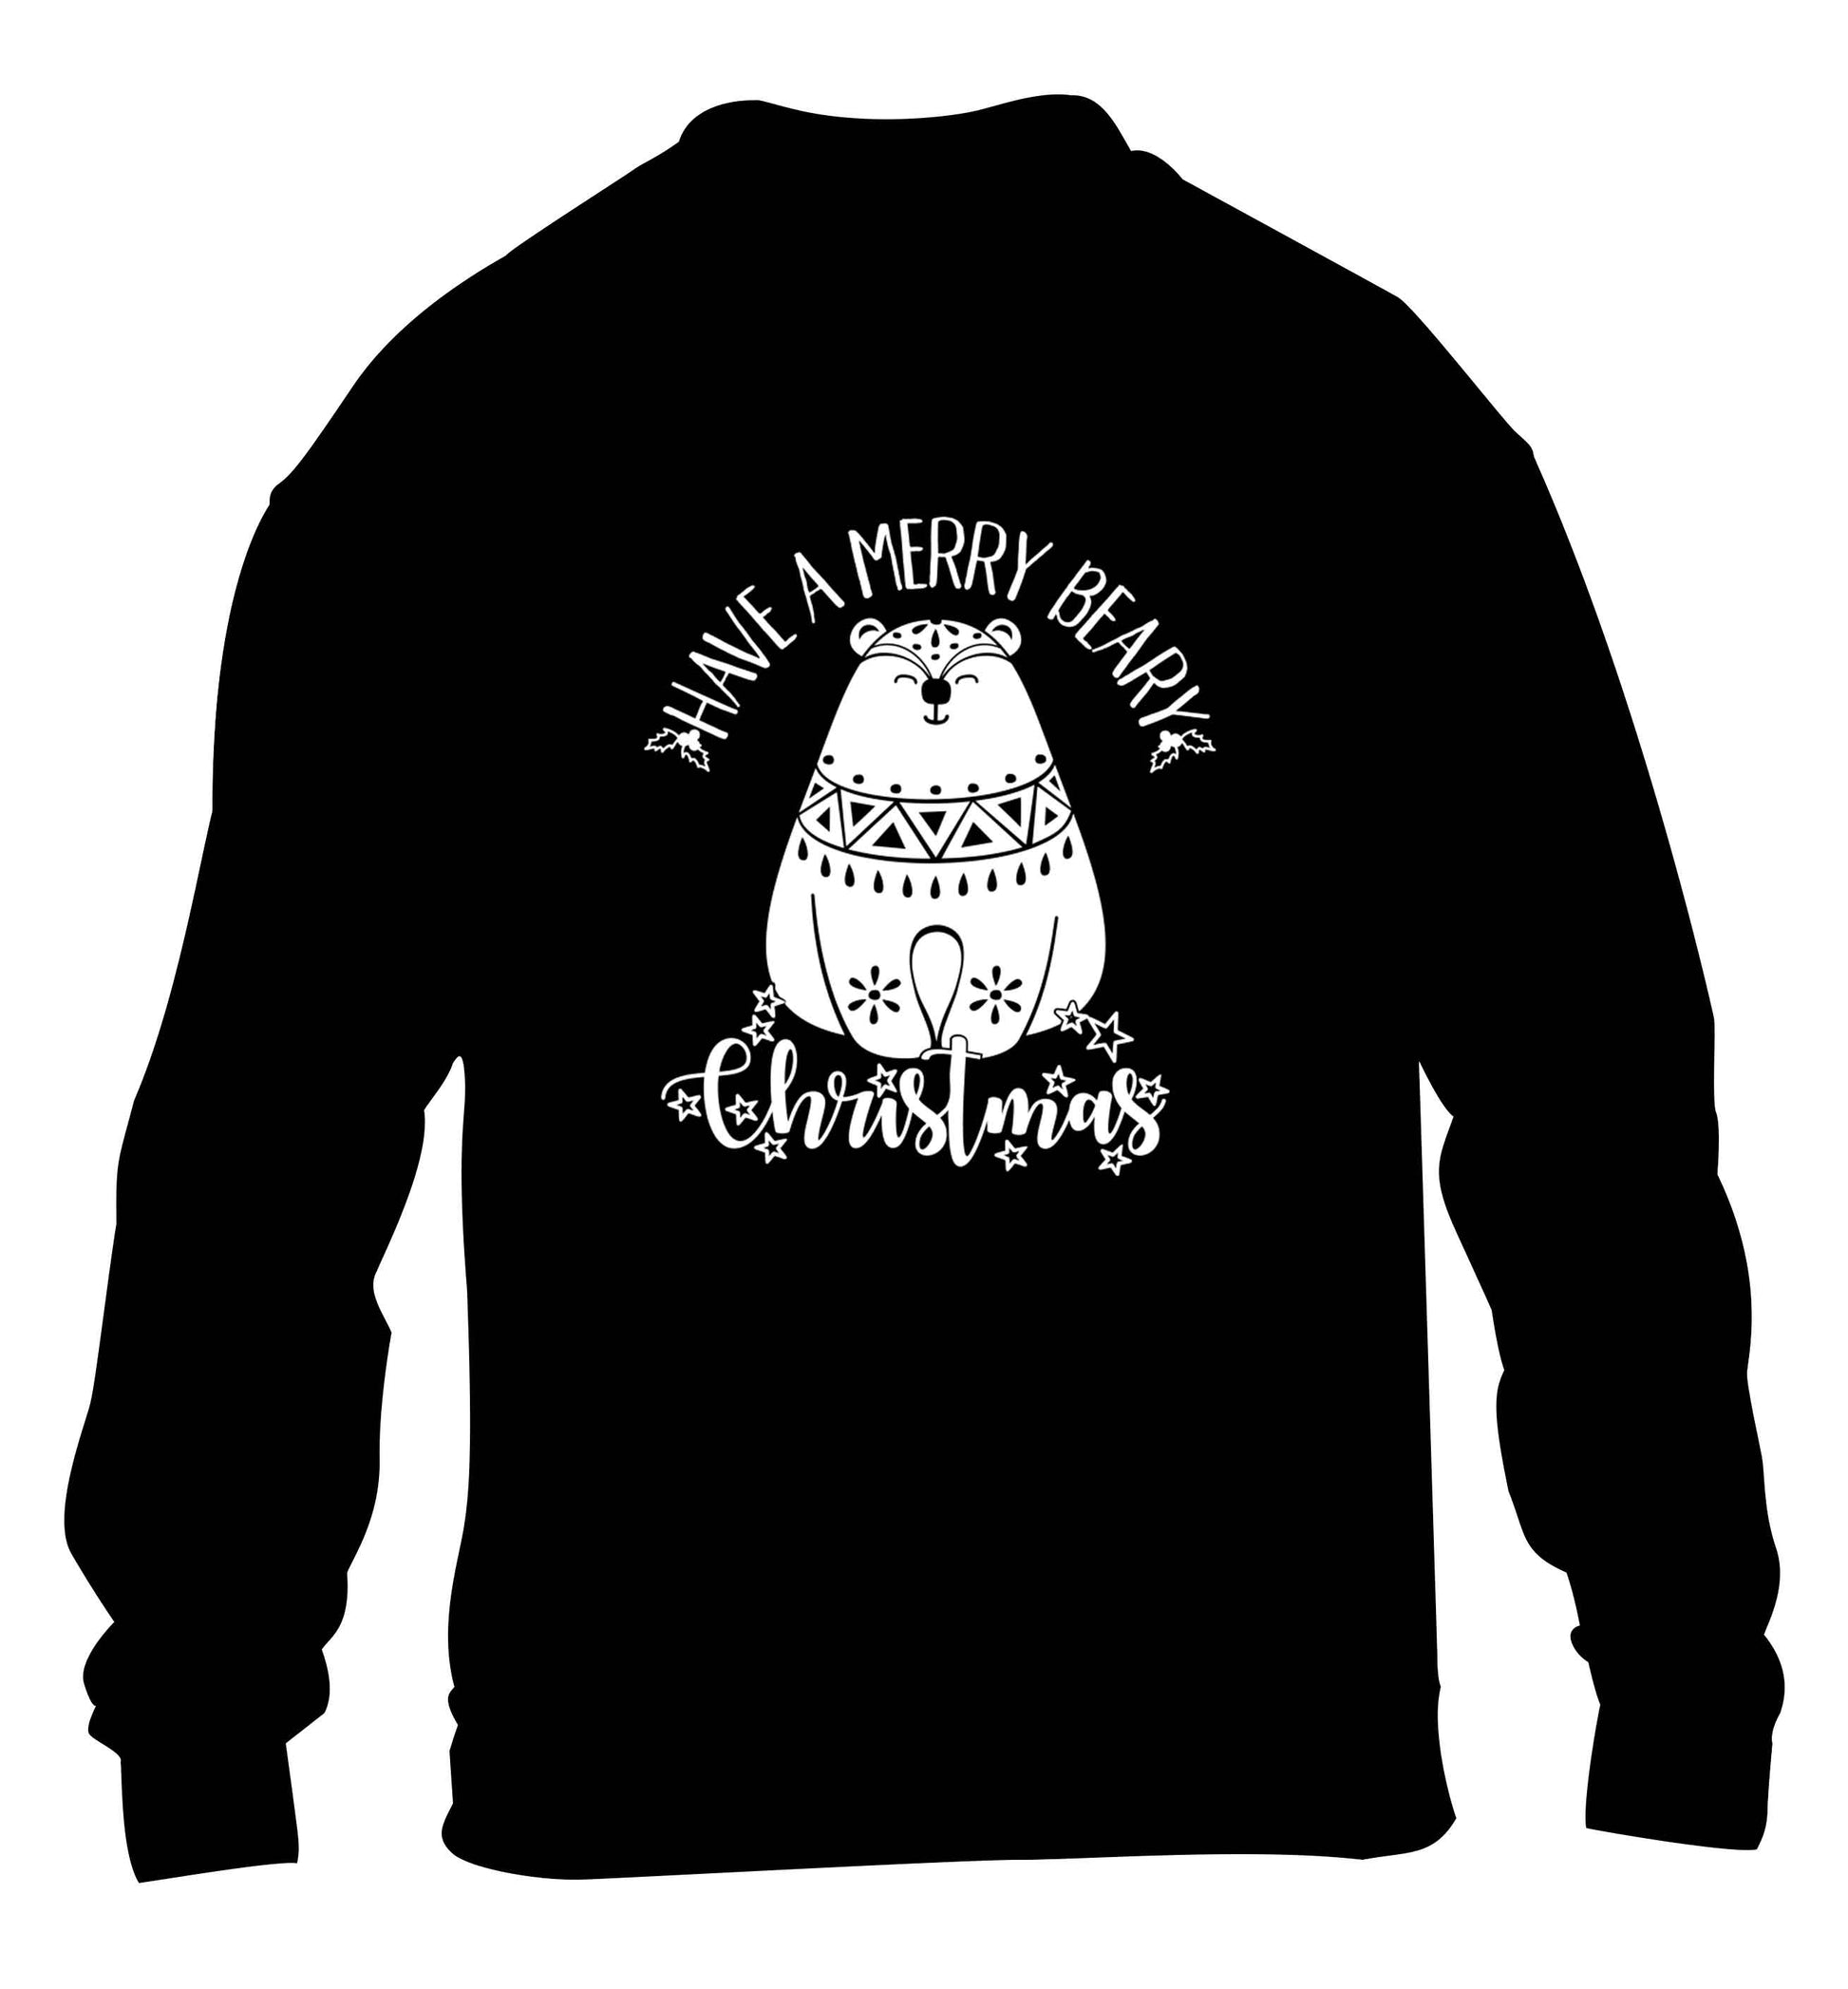 Have a merry beary Christmas children's black sweater 12-13 Years